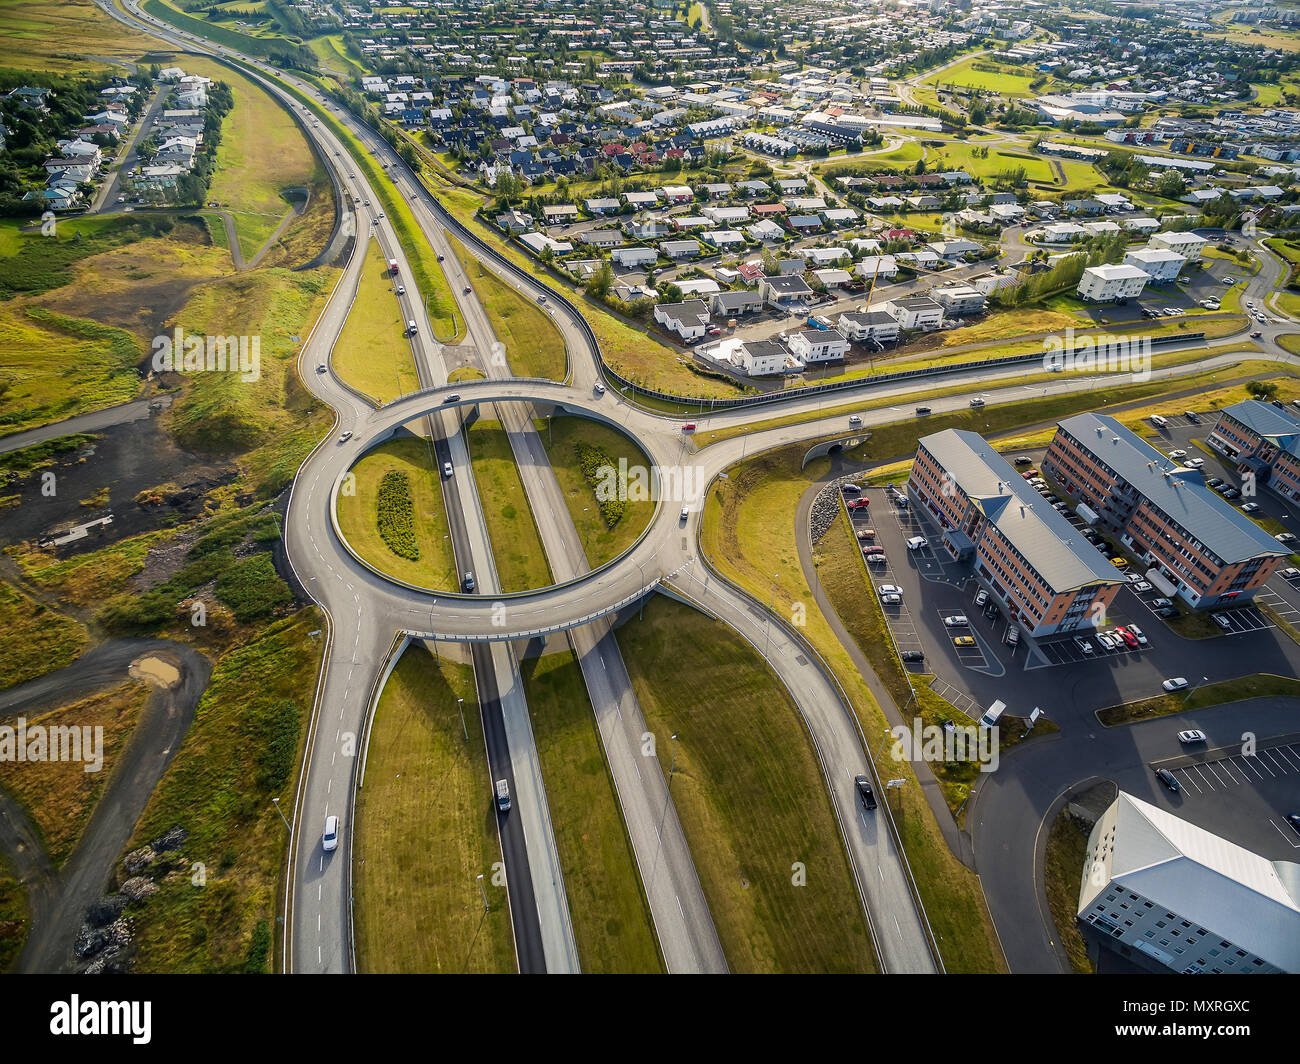 Aerial view of traffic circle and roads, Reykjavik area, Iceland Stock Photo